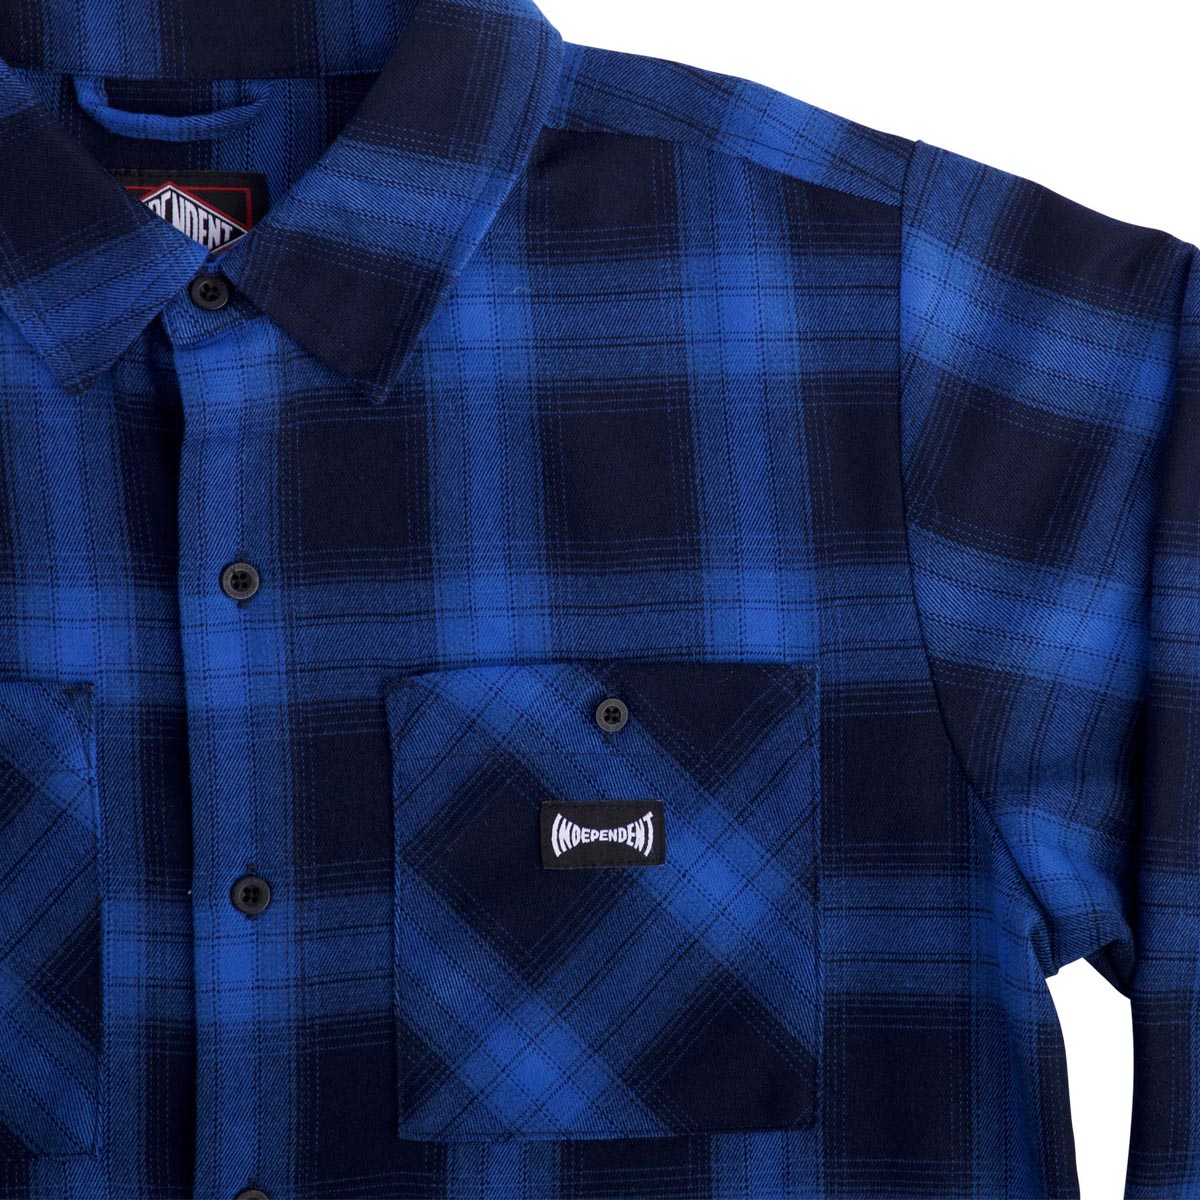 Independent Legacy Flannel Long Sleeve Shirt - Blue image 4